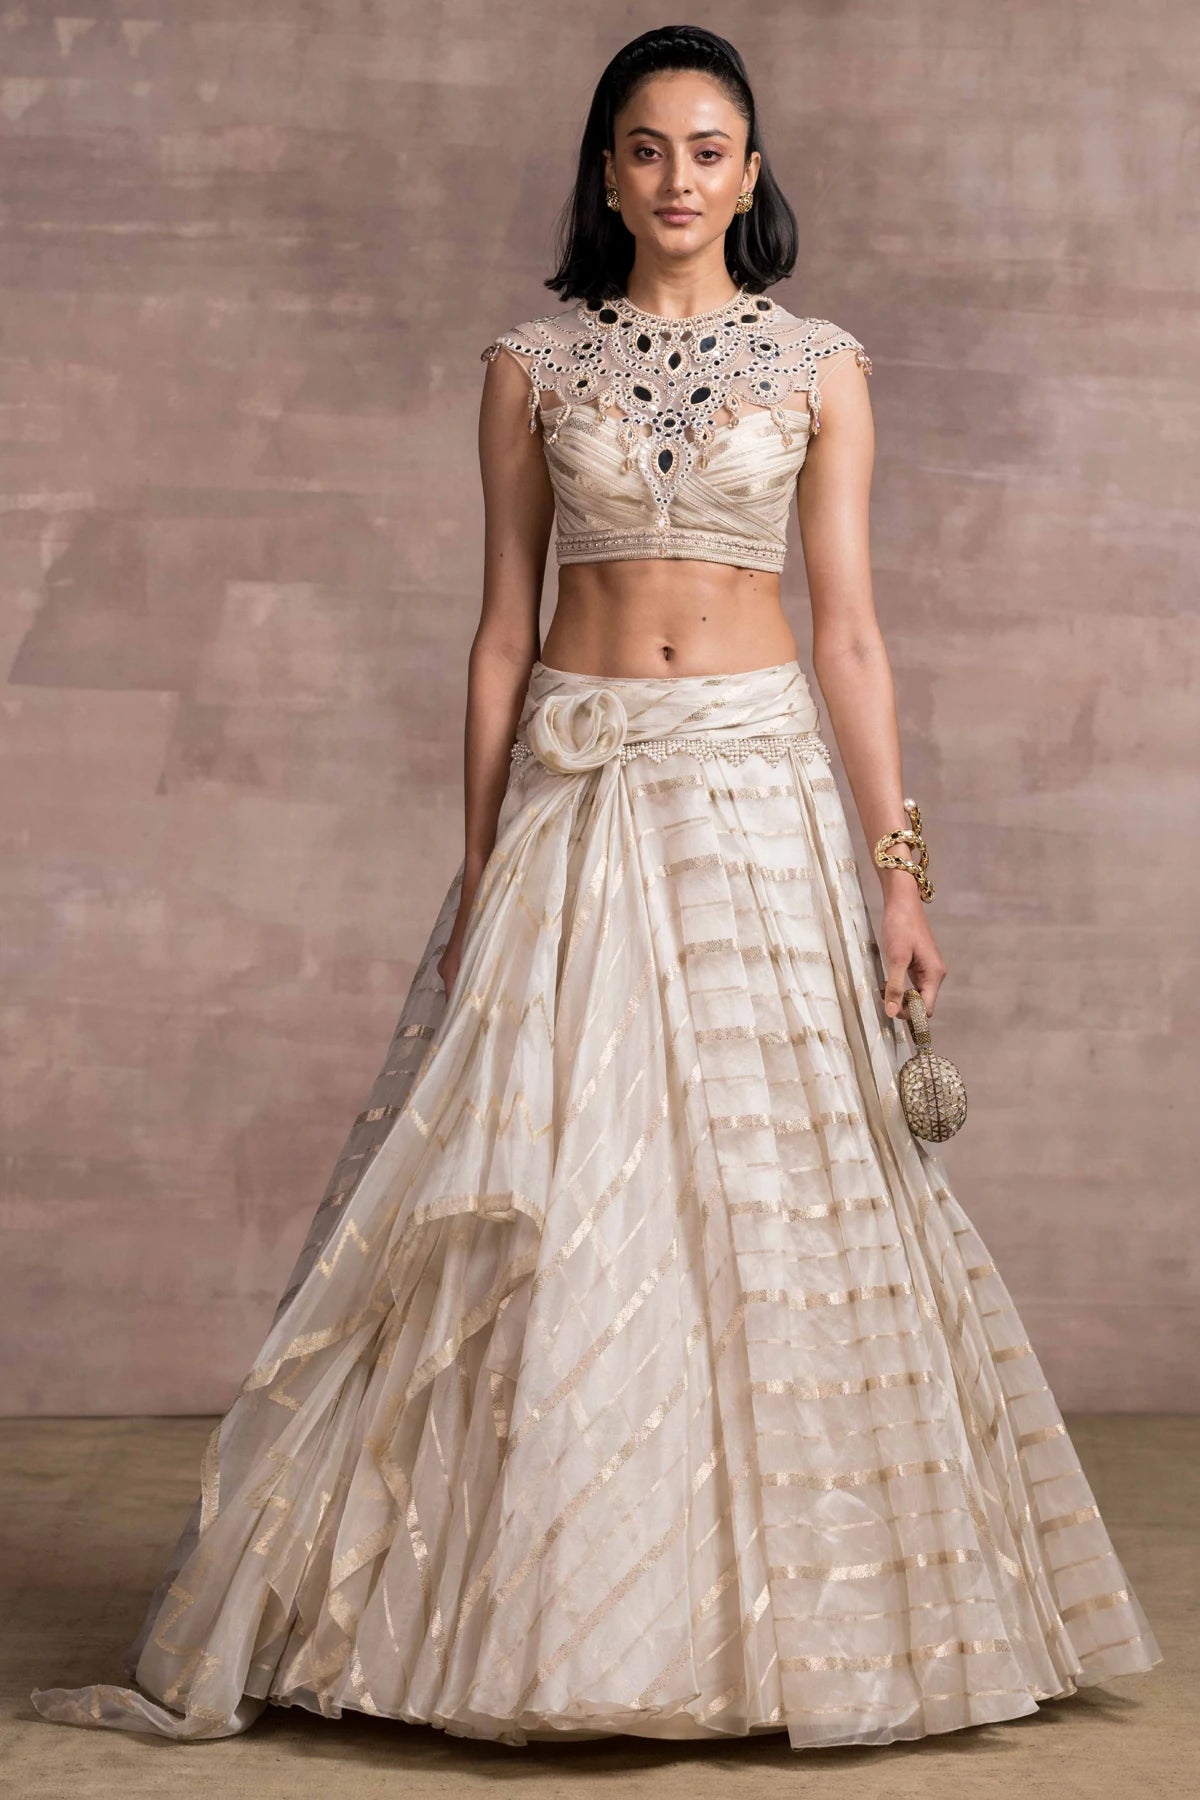 Ivory Bow Lehenga - Indian Clothing in Denver, CO, Aurora, CO, Boulder, CO, Fort Collins, CO, Colorado Springs, CO, Parker, CO, Highlands Ranch, CO, Cherry Creek, CO, Centennial, CO, and Longmont, CO. Nationwide shipping USA - India Fashion X